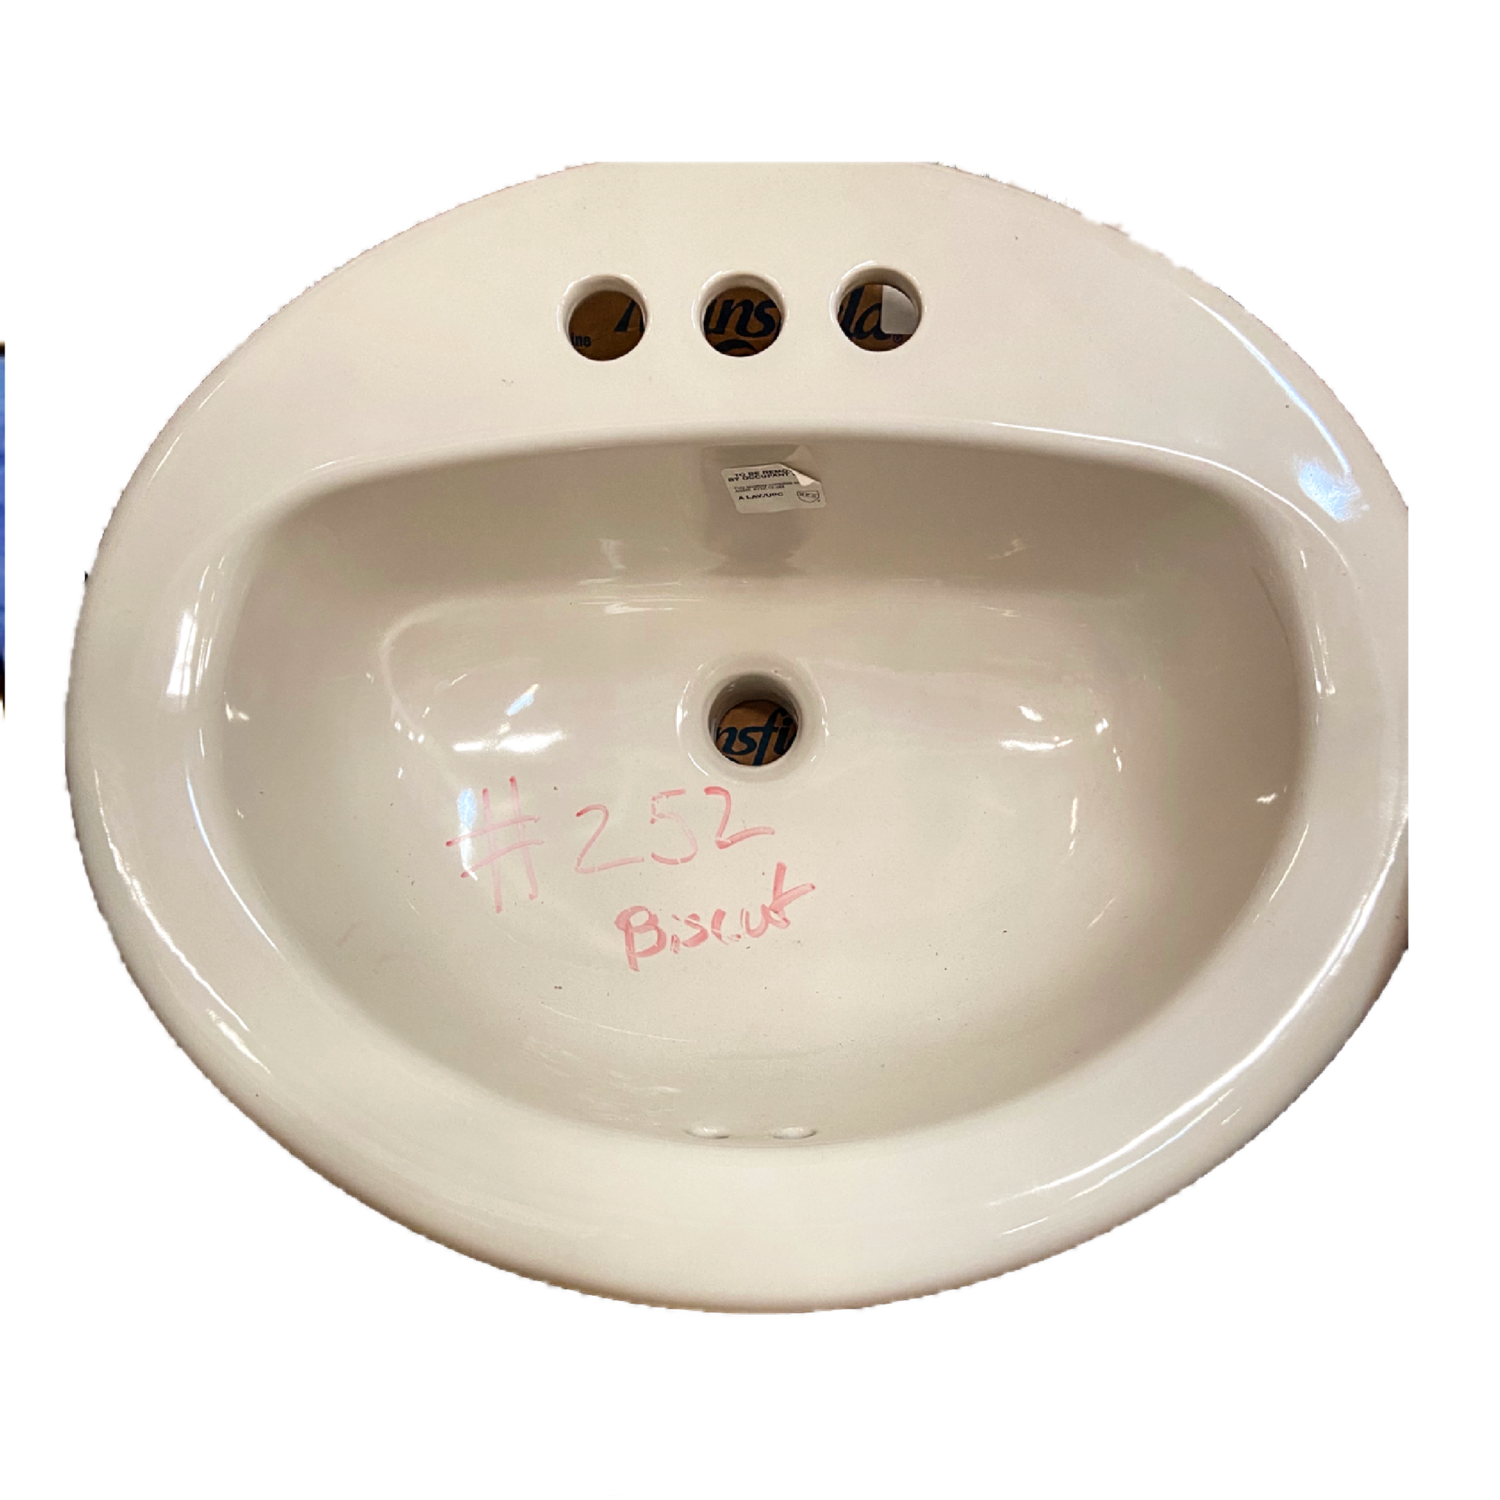 Mansfield Oval Self Rimming Lavatory Sink 252 4" Biscuit 